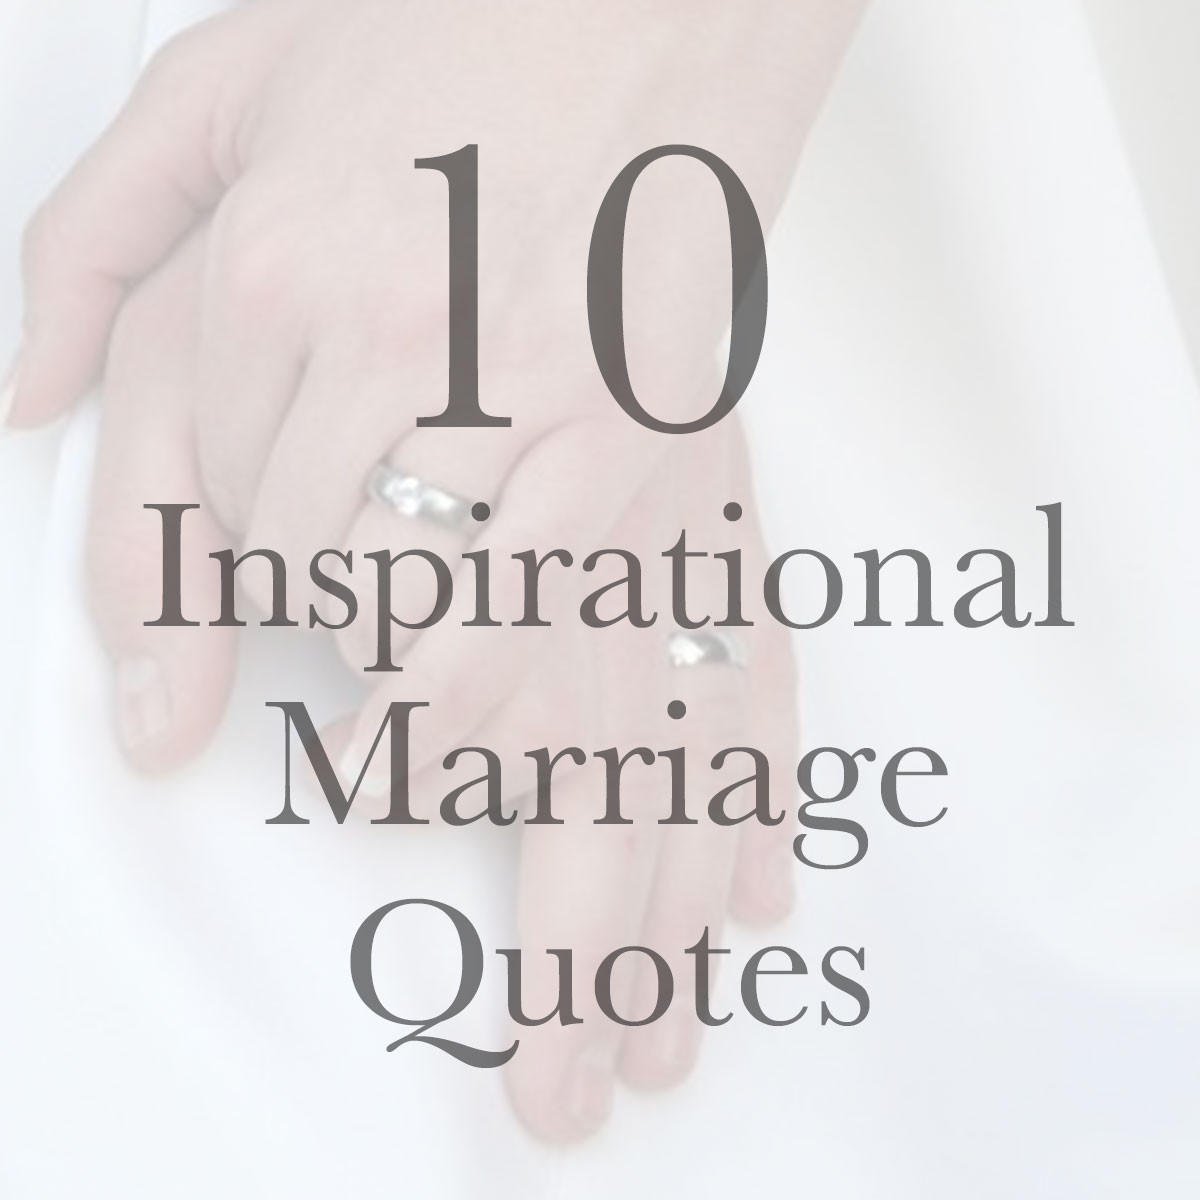 Positive Marriage Quotes
 marriage quotes